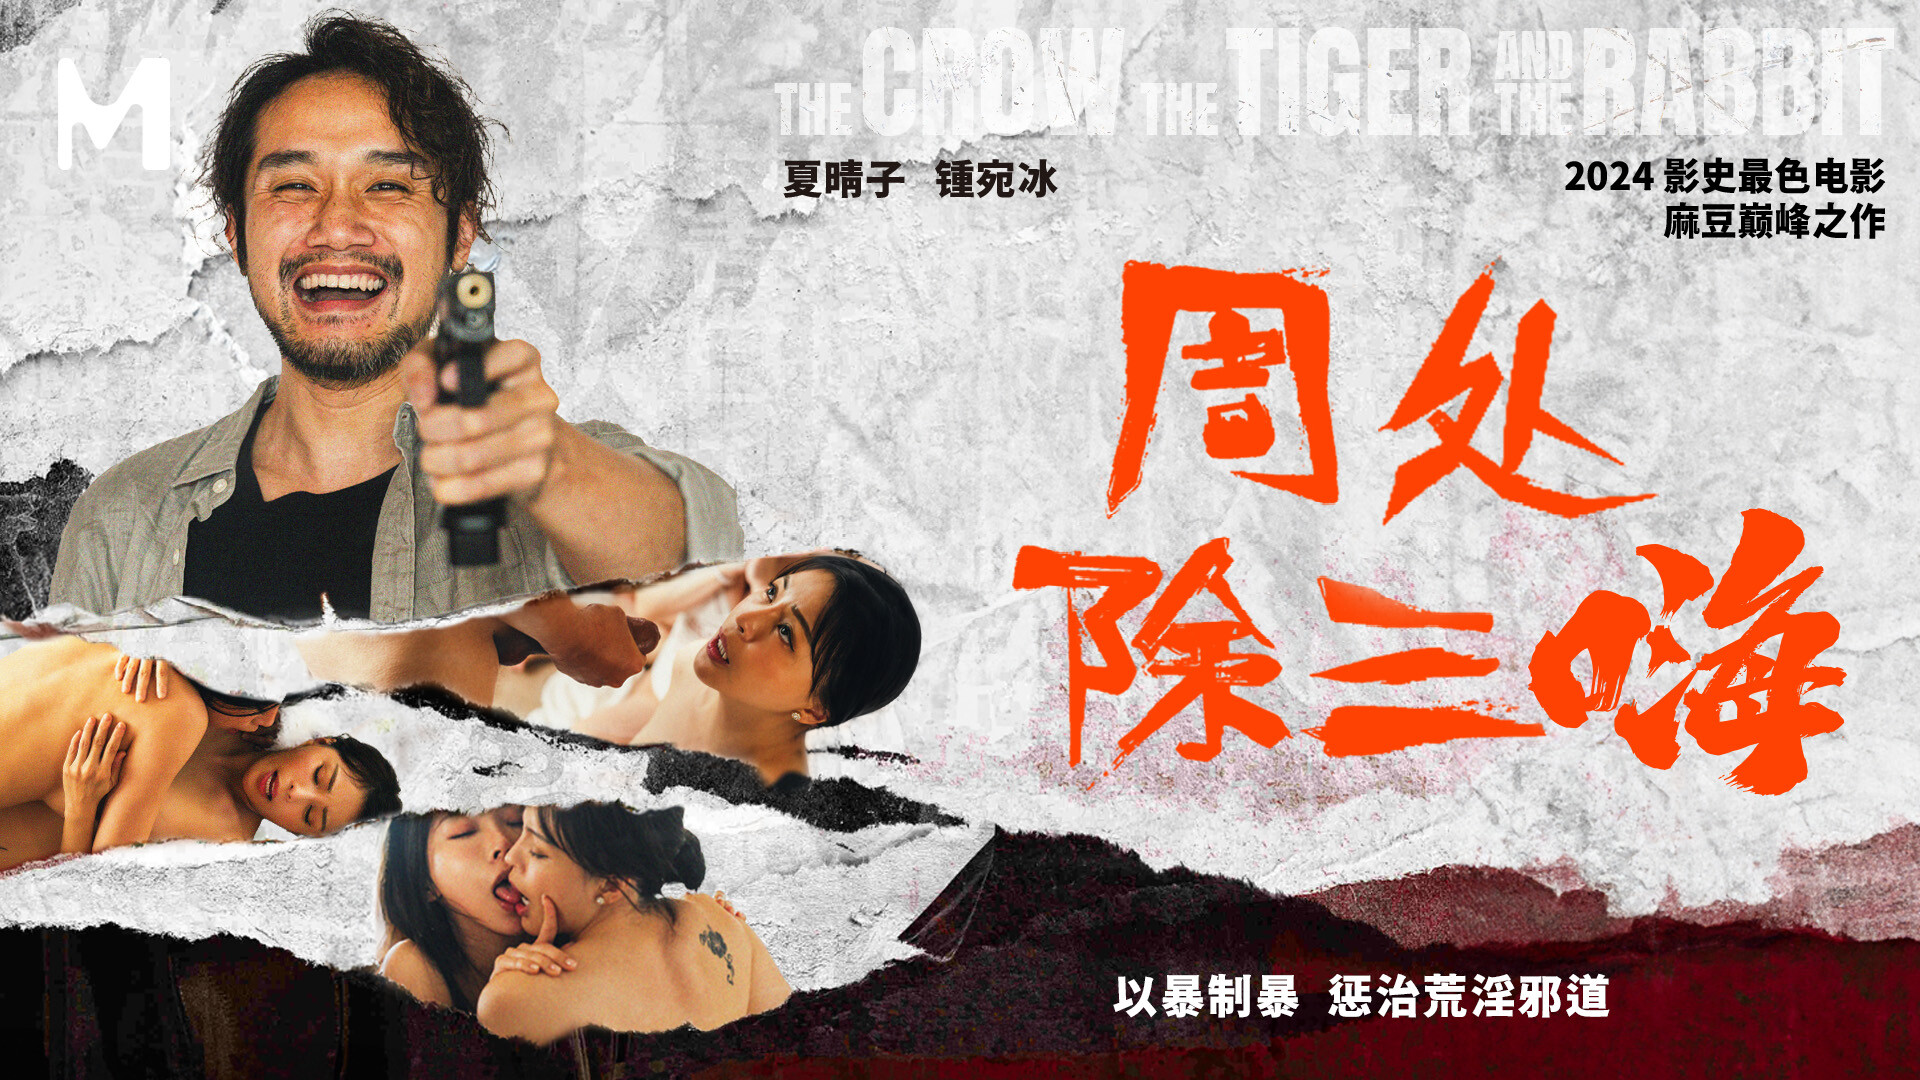 The Crow, The Tiger and The Rabbit MD-0240